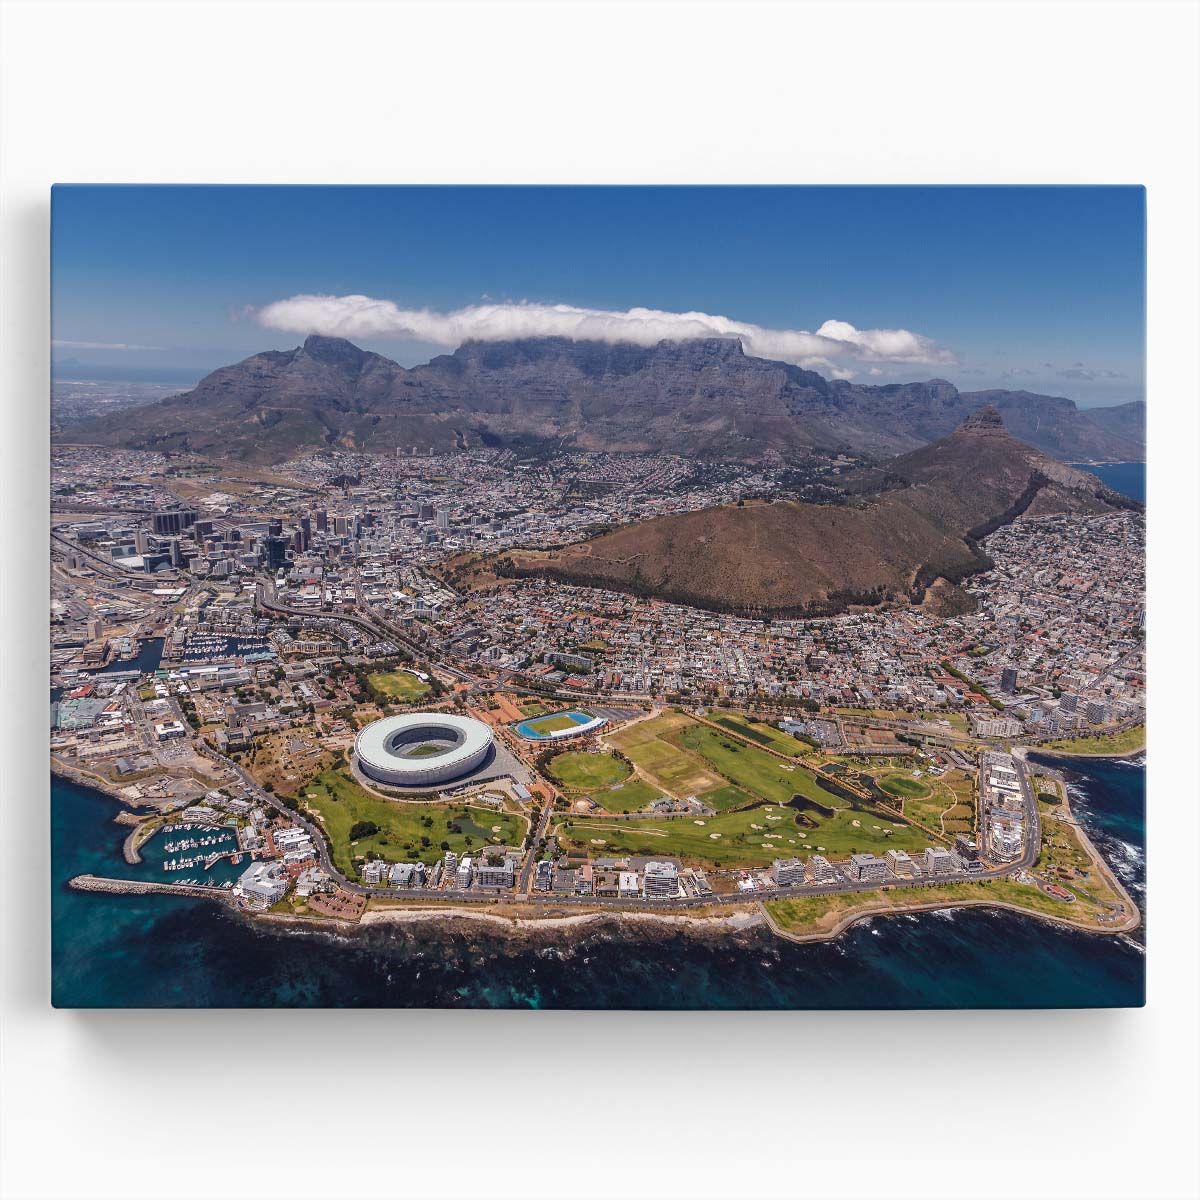 Cape Town Aerial View Urban Landscape Wall Art by Luxuriance Designs. Made in USA.